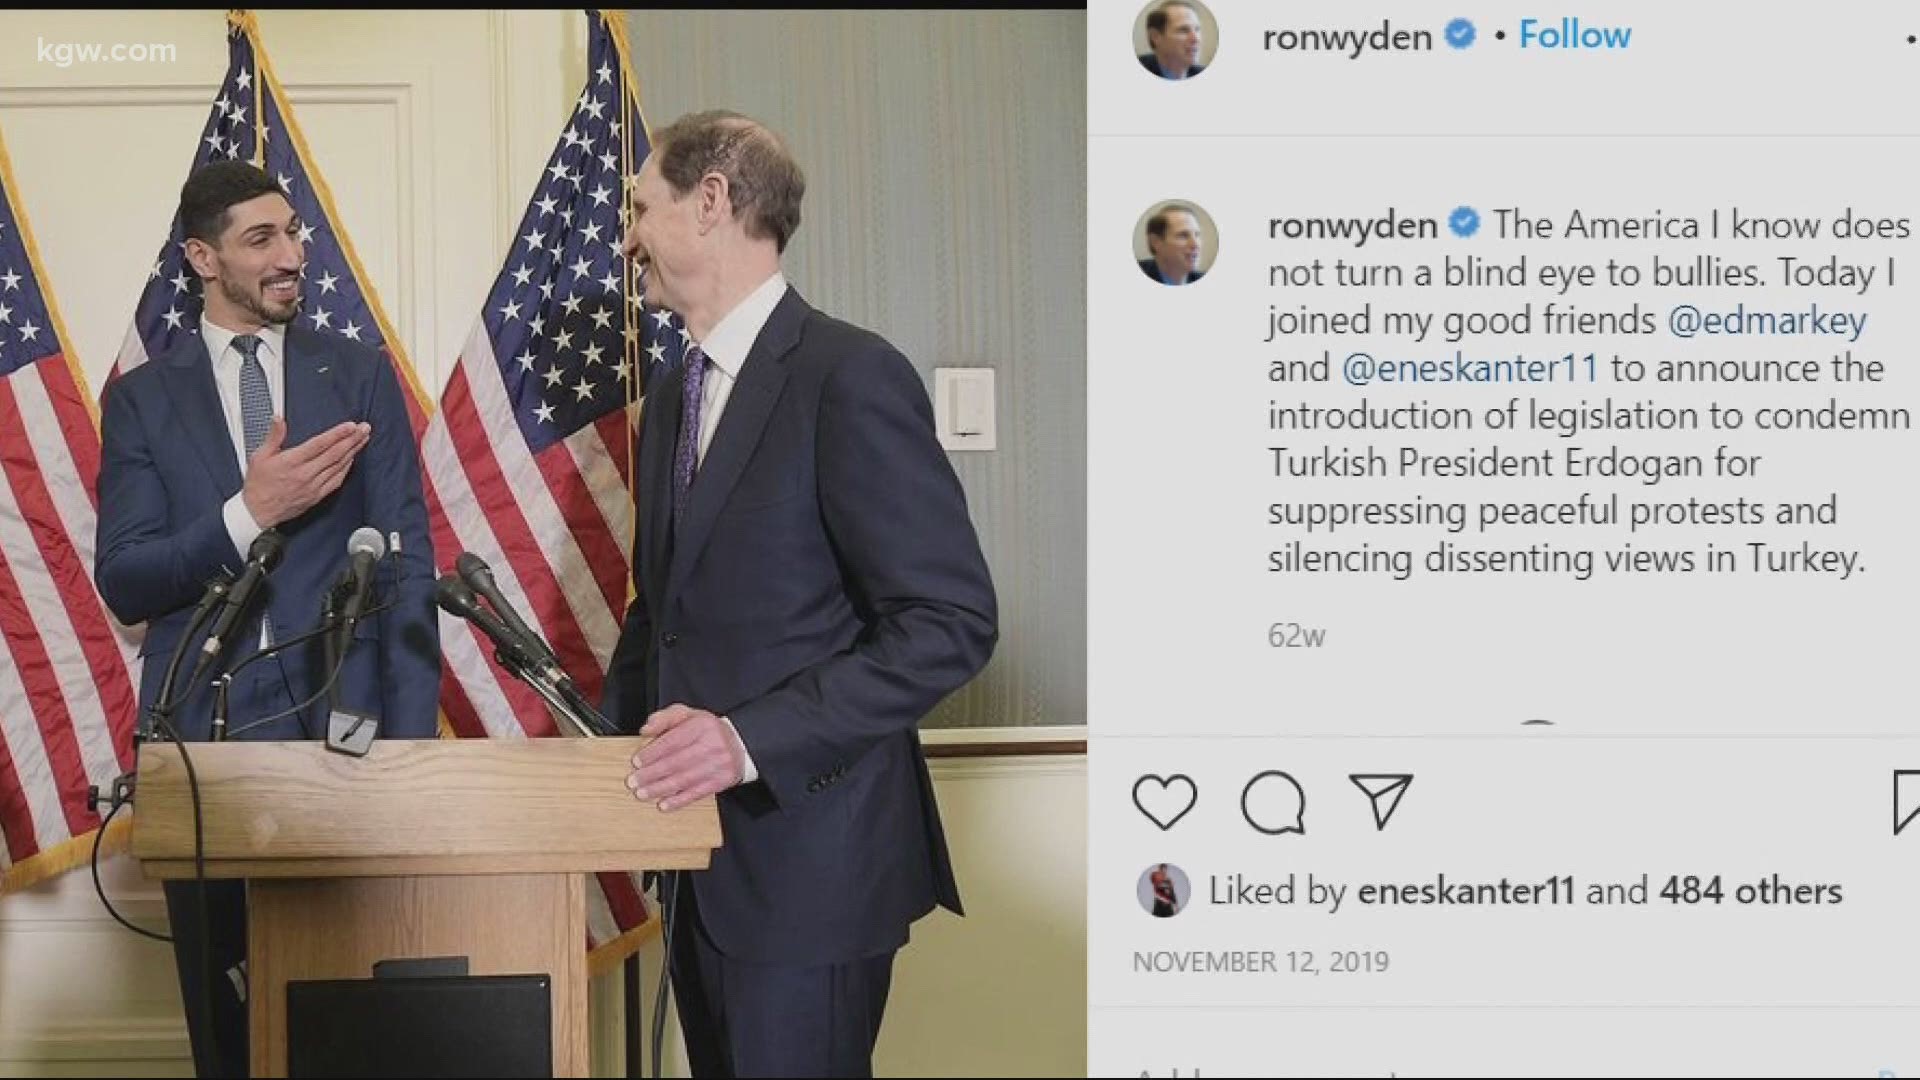 U.S. Sen. Ron Wyden (D-Oregon) joined KGW's 3-on-3 Blazers podcast to discuss all things Rip City including his friendship with center Enes Kanter.